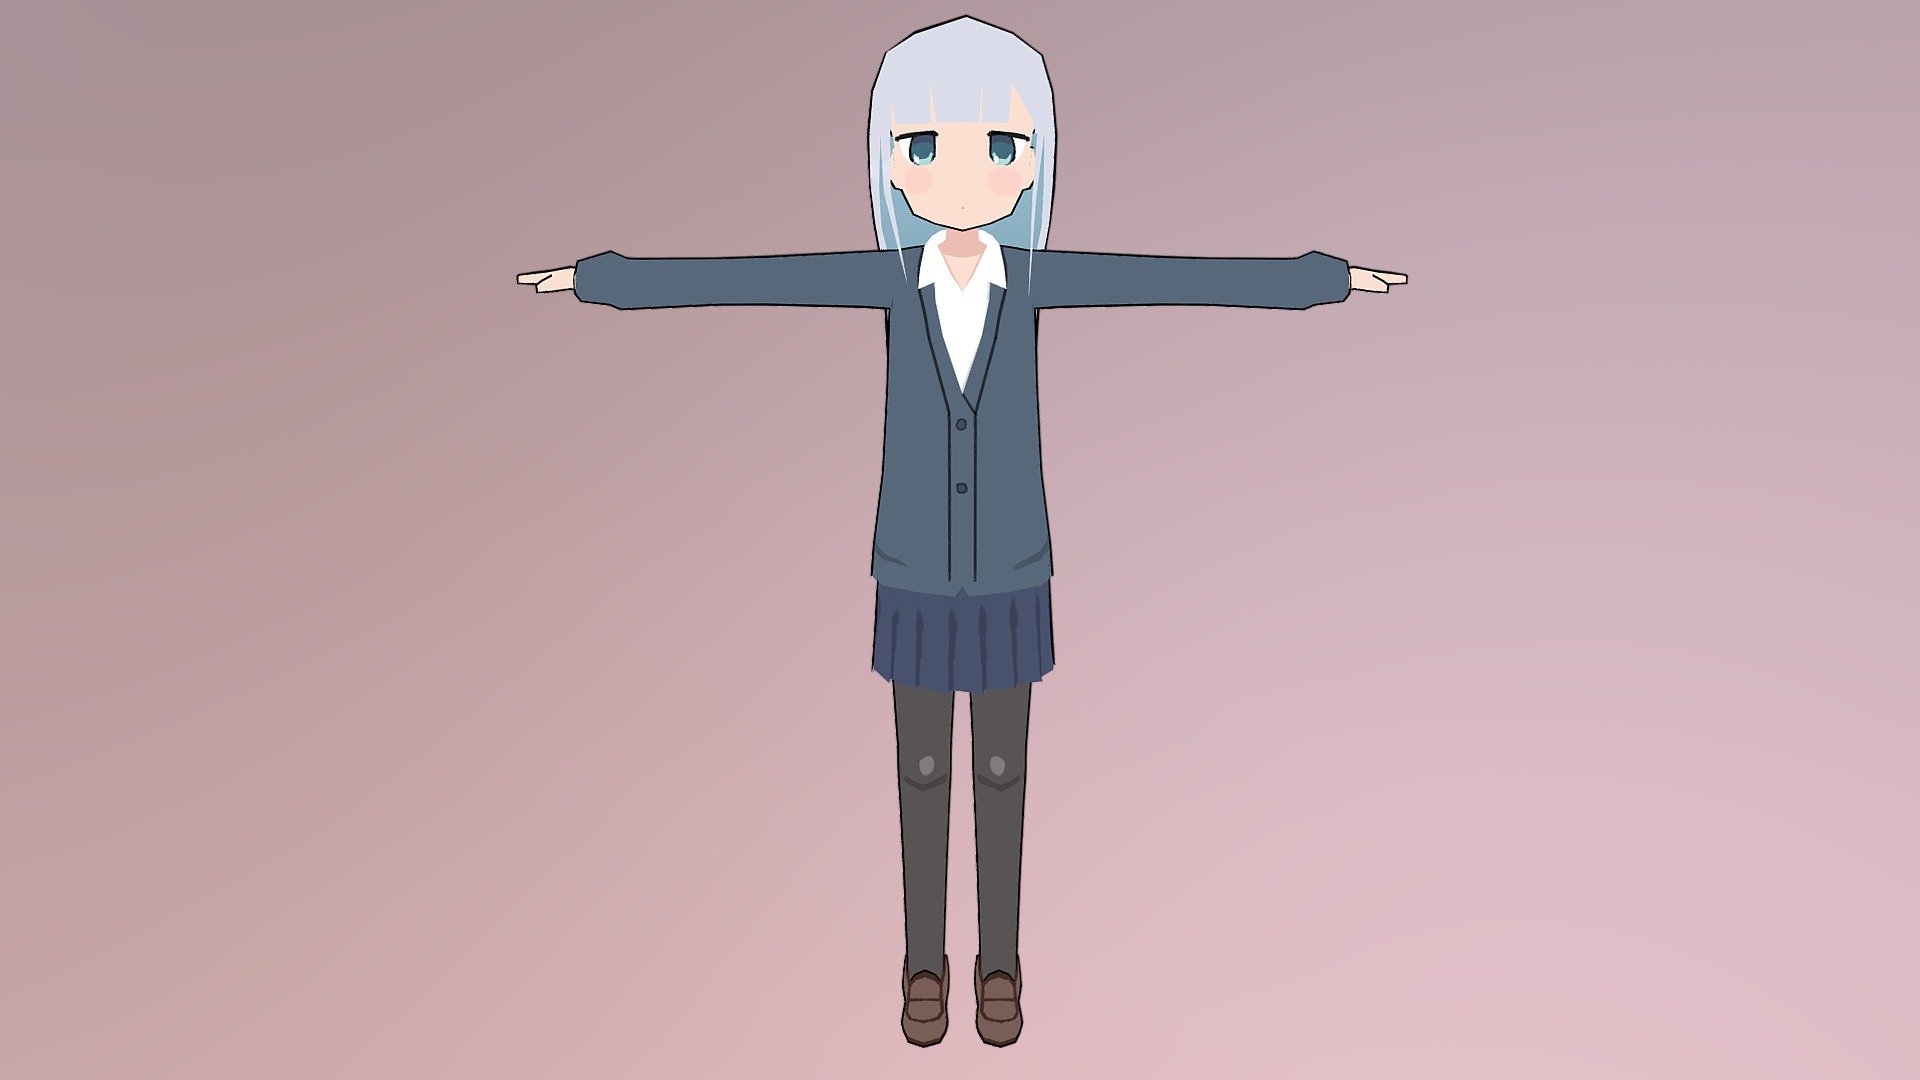 900+ verts without outline effect.
Fully Rigged 3d model